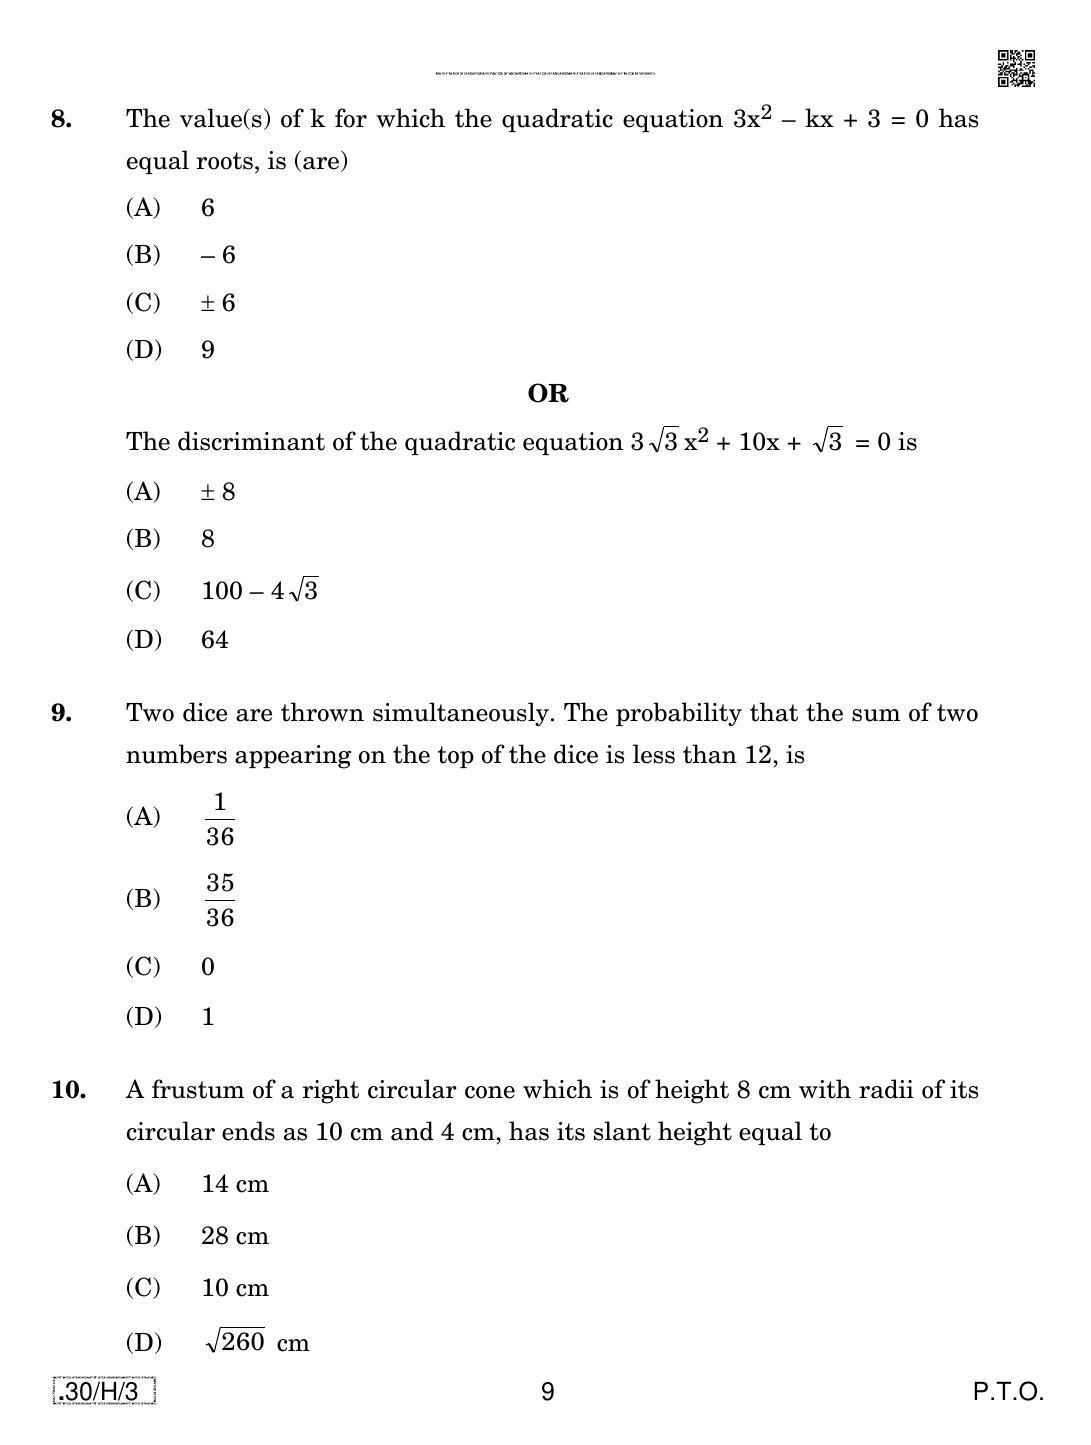 CBSE Class 10 30-C-3 - Maths (Standard) 2020 Compartment Question Paper - Page 9